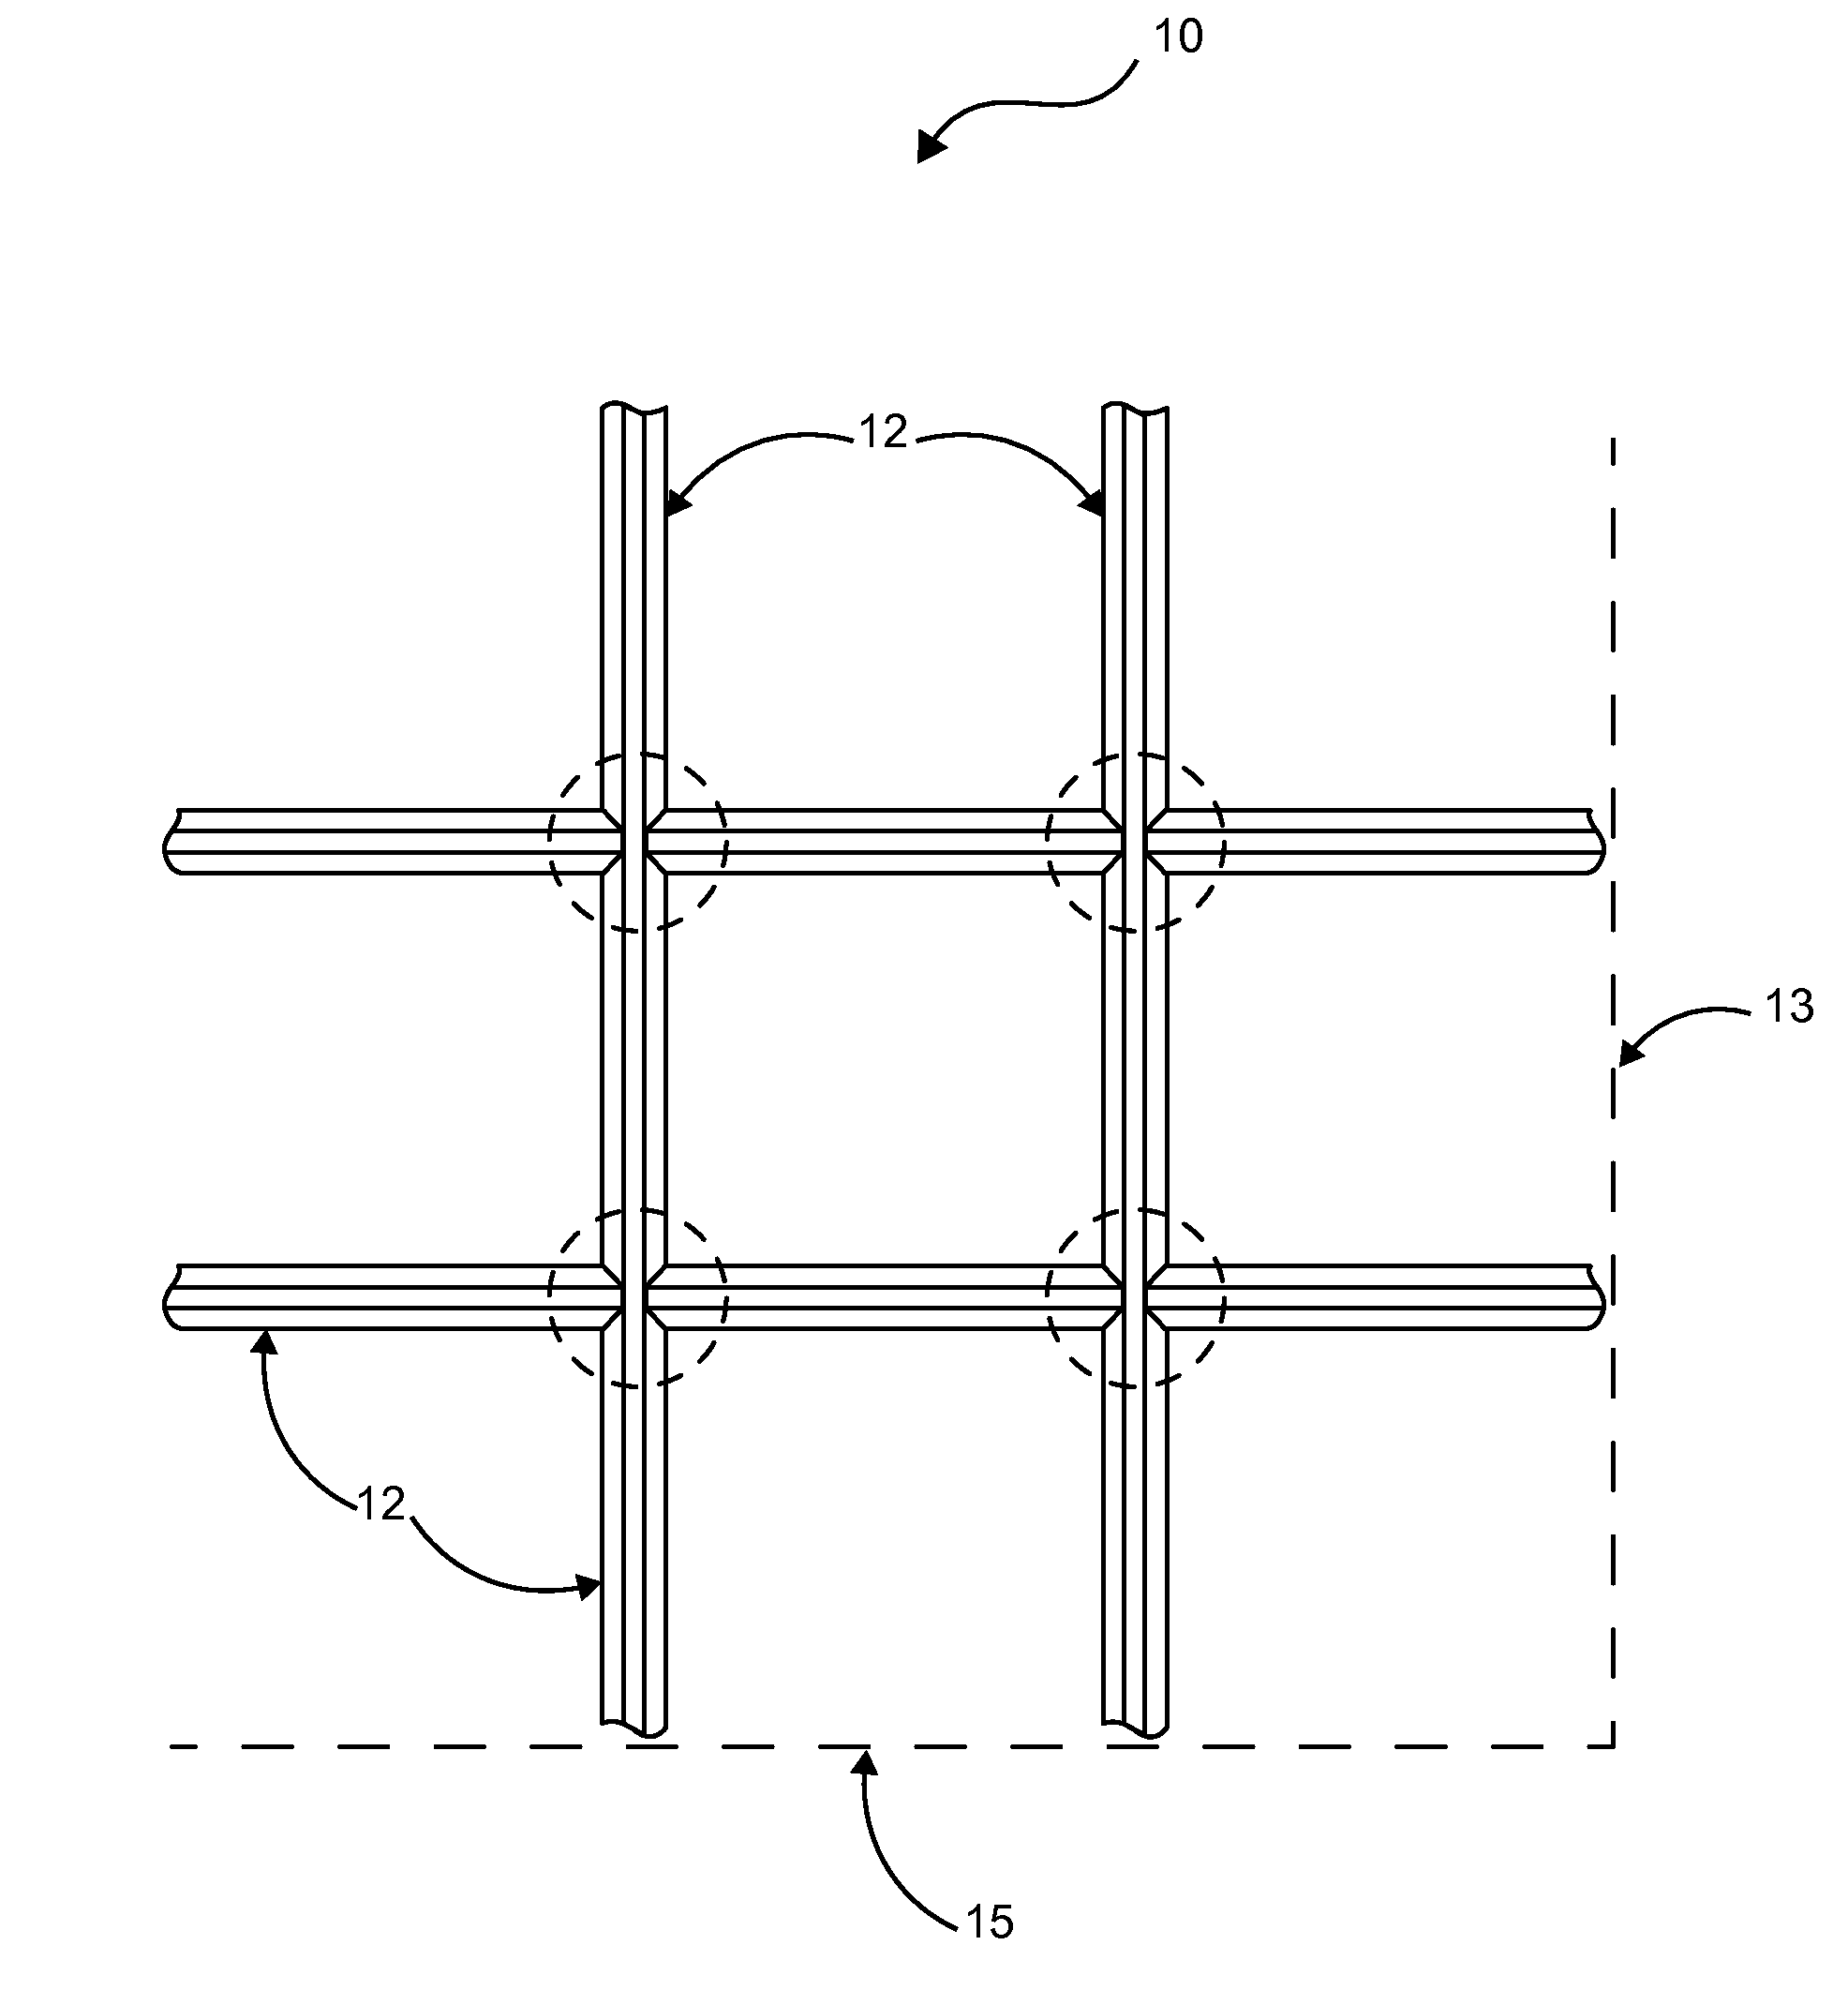 Method and Apparatus For Assembling Simulated Divided Light Window Grids